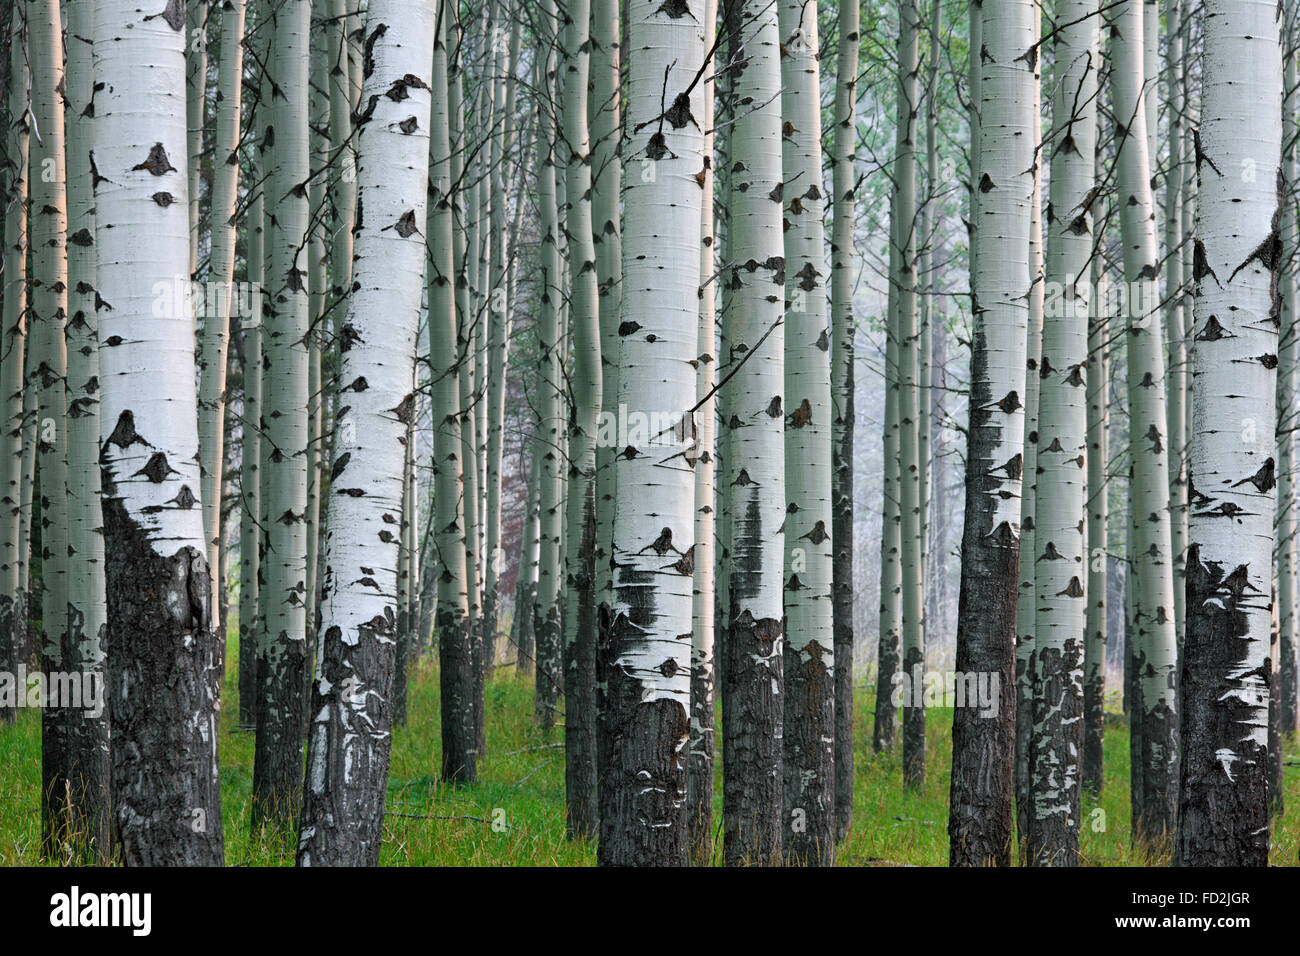 Quaking aspen / trembling aspen (Populus tremuloides), detail of tree trunks in forest, native to North America and Canada Stock Photo